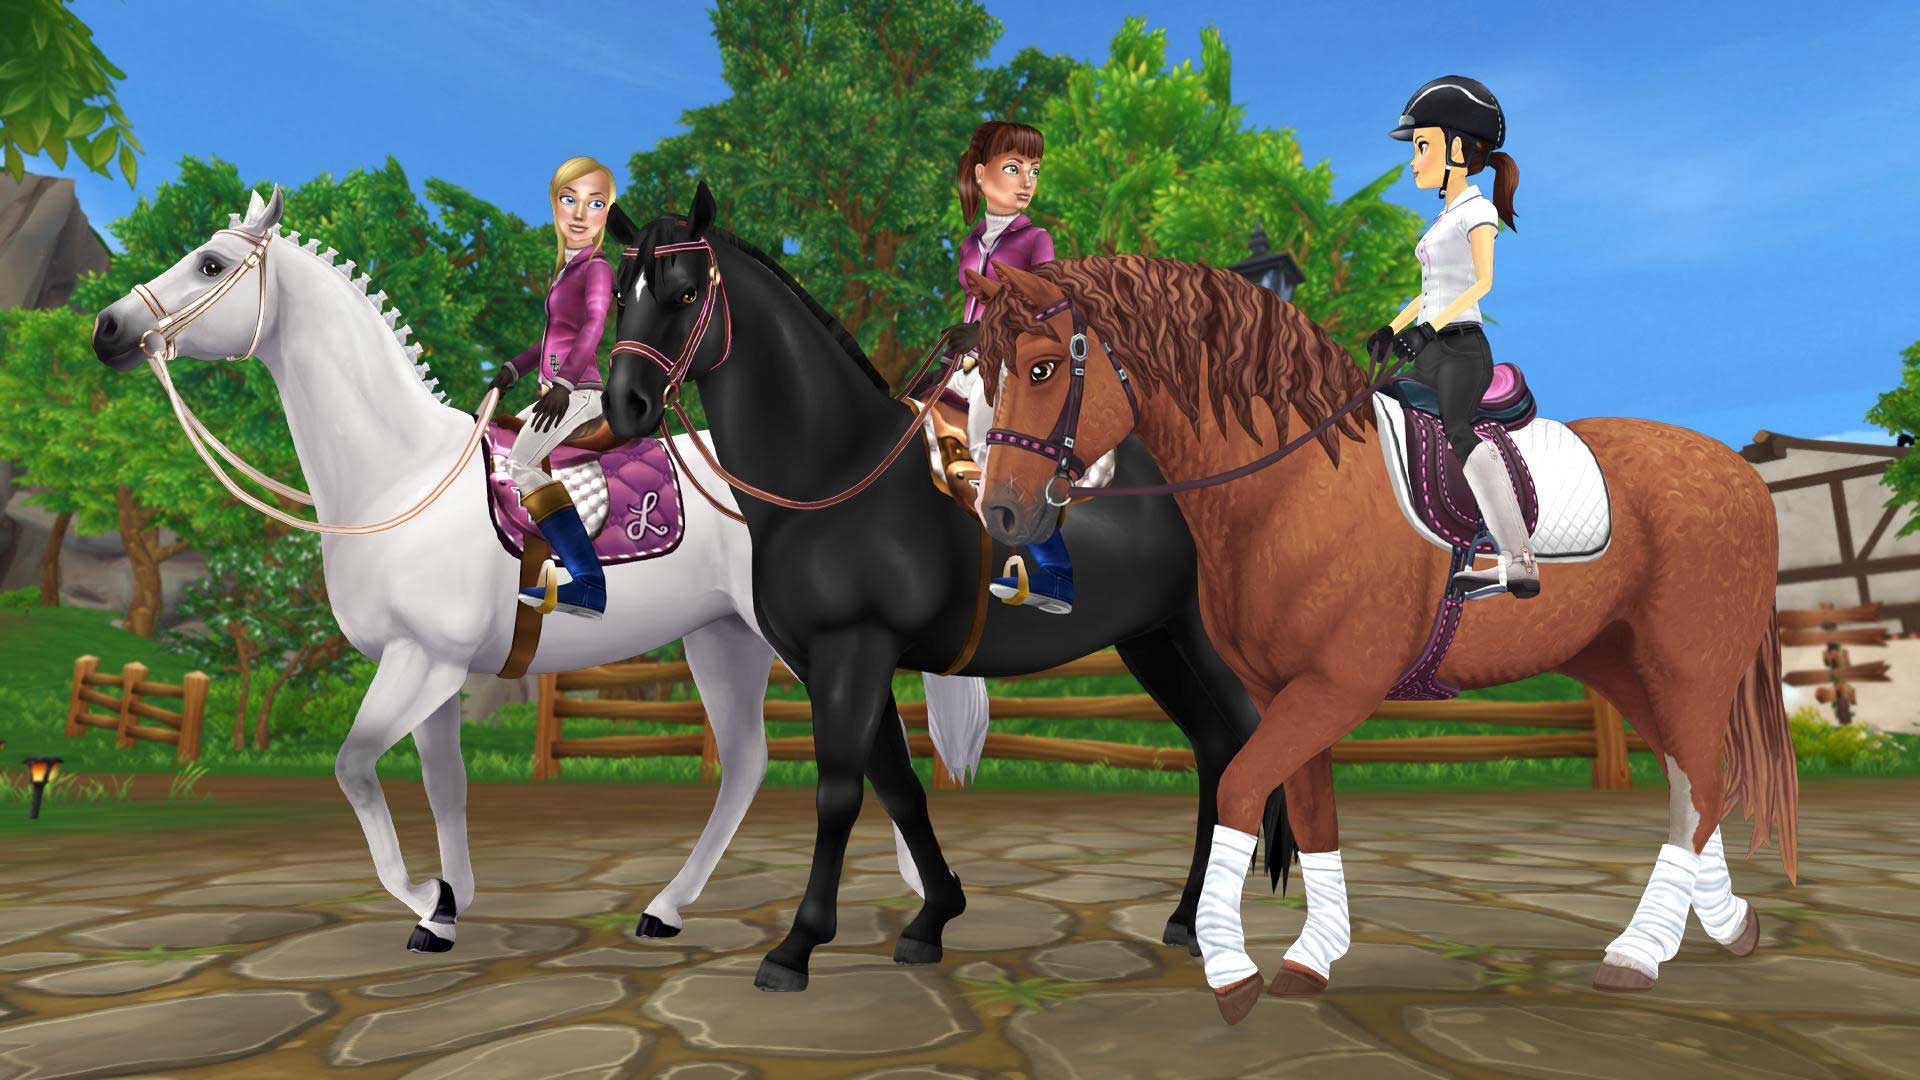 Star Stable Codes For Free Clothing & Star Coins [March 2021]